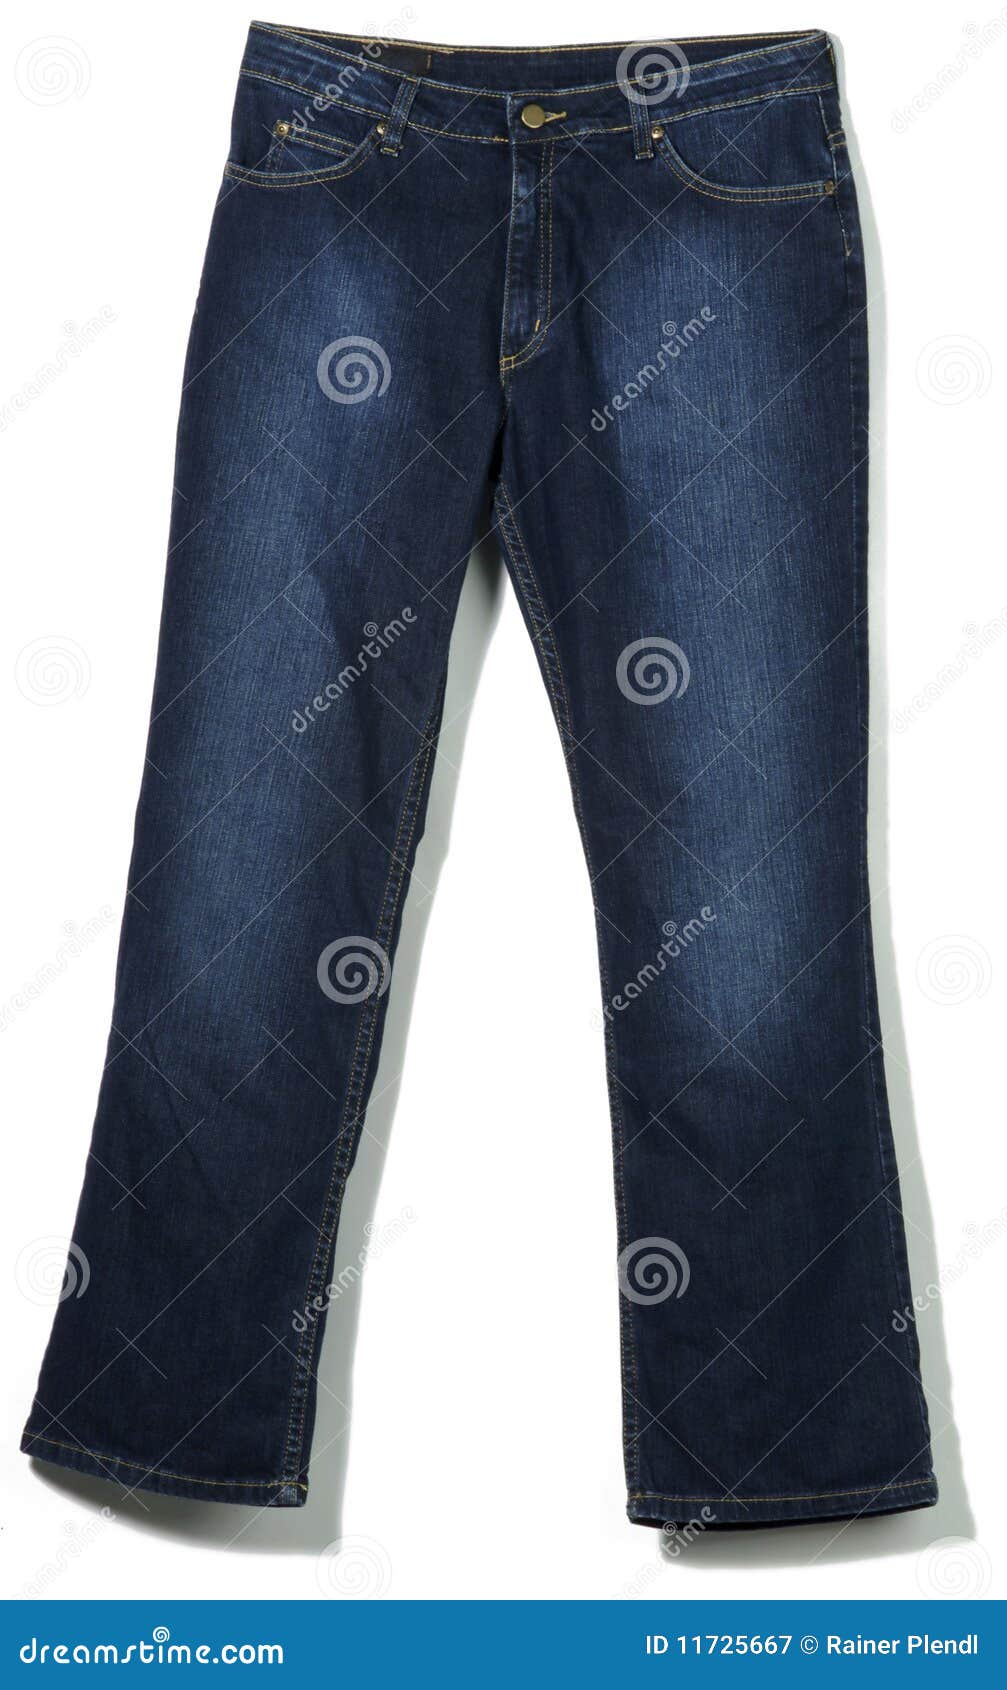 Jeans stock image. Image of stitch, color, cotton, jeans - 11725667